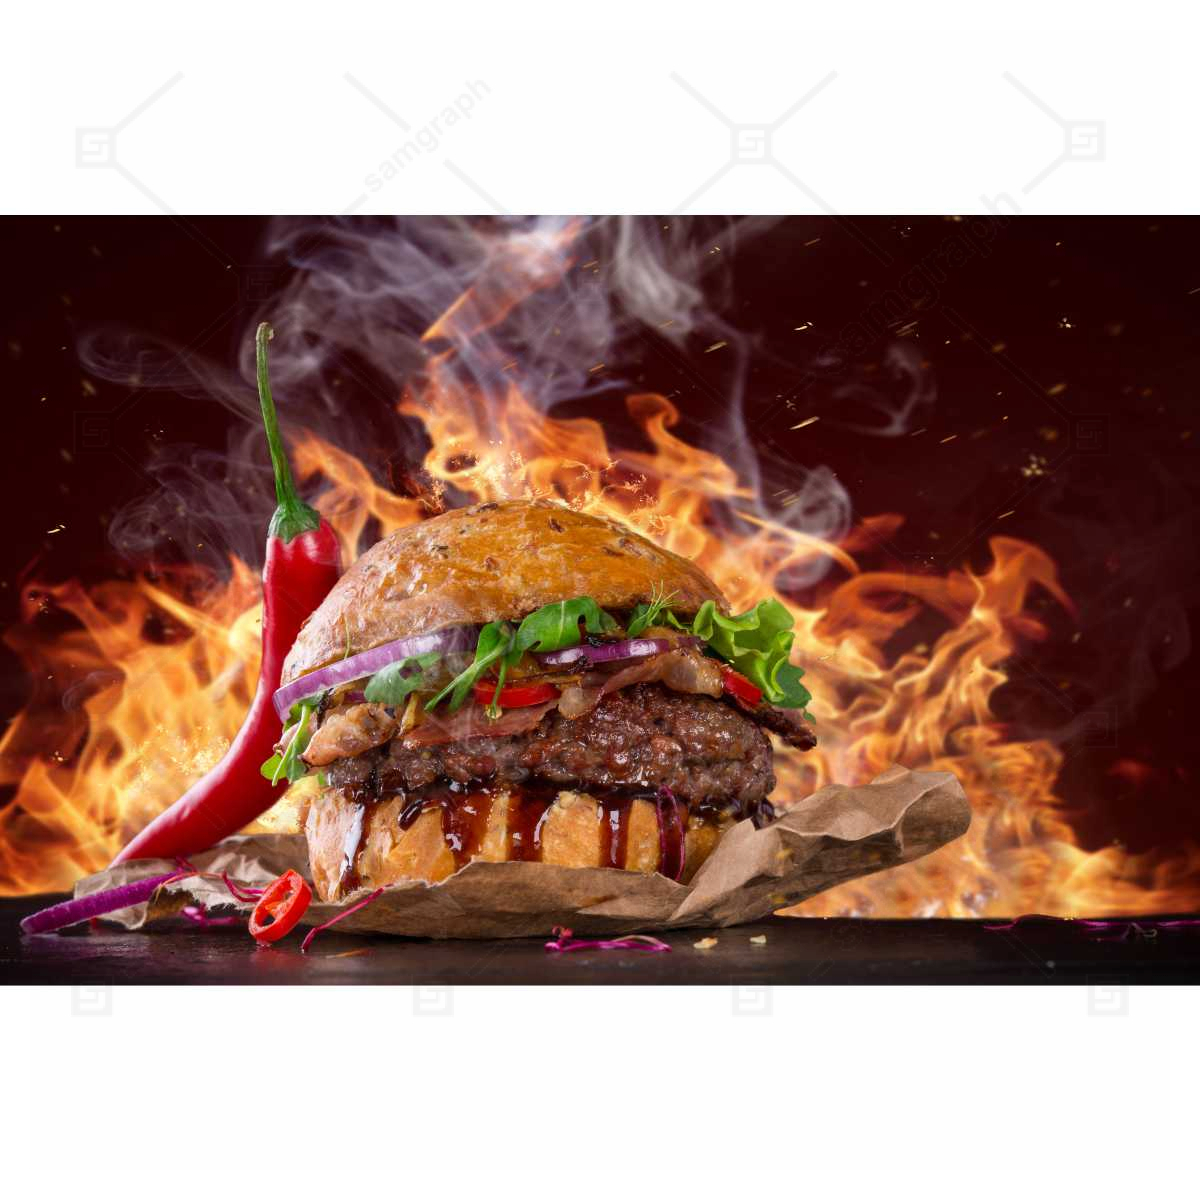 High quality photo of juicy hamburger with fire and pepper lettuce onion parsley 2 1 پوستر انسان - اندام - خطرات سلامتی - پزشکی